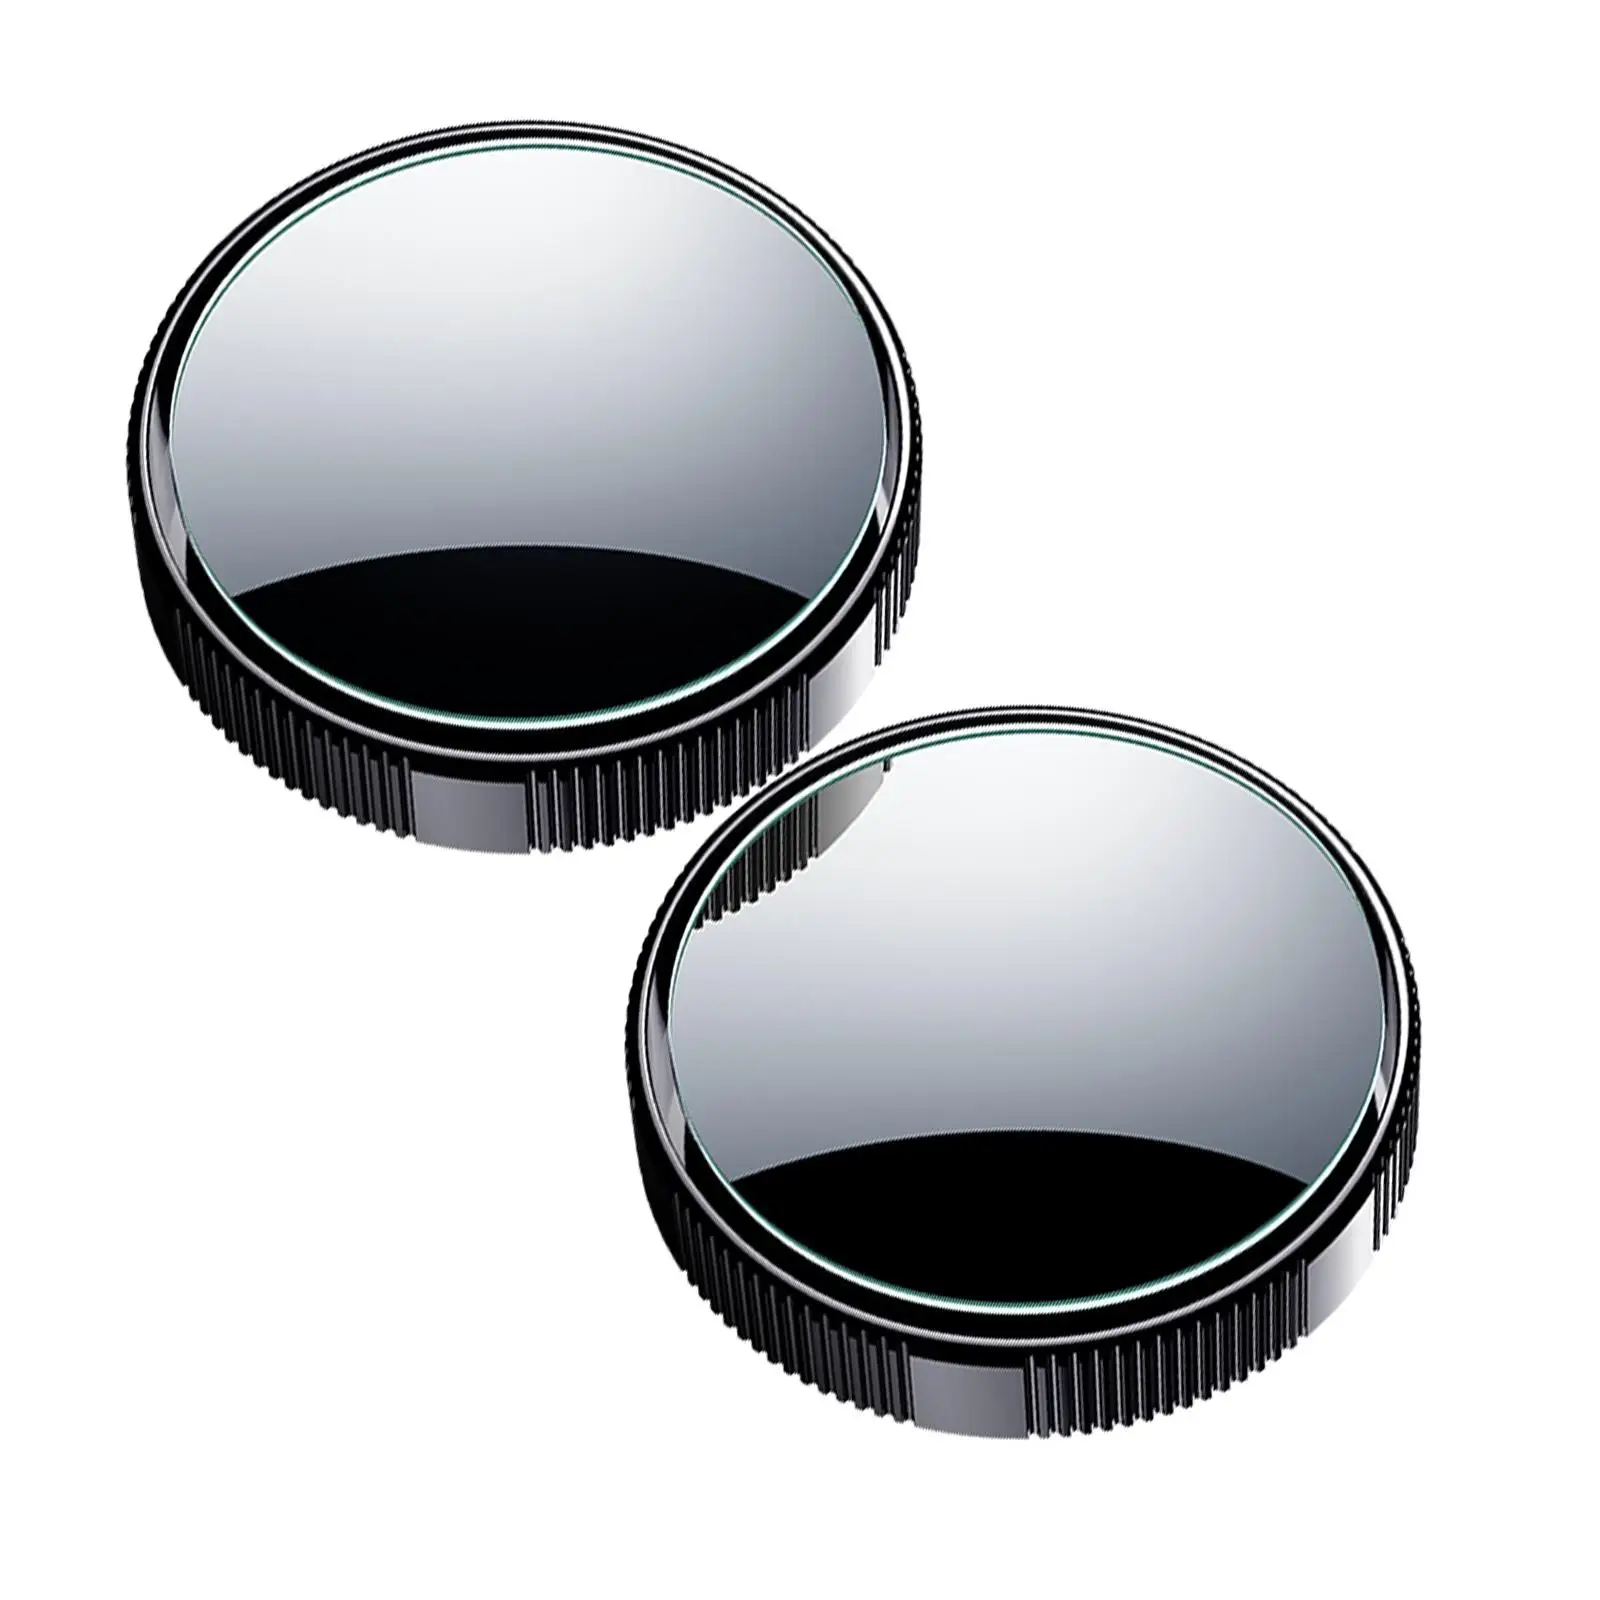 2Pcs Blind Spot Mirrors Adjustable ABS Housing for Cars Motorcycles SUV